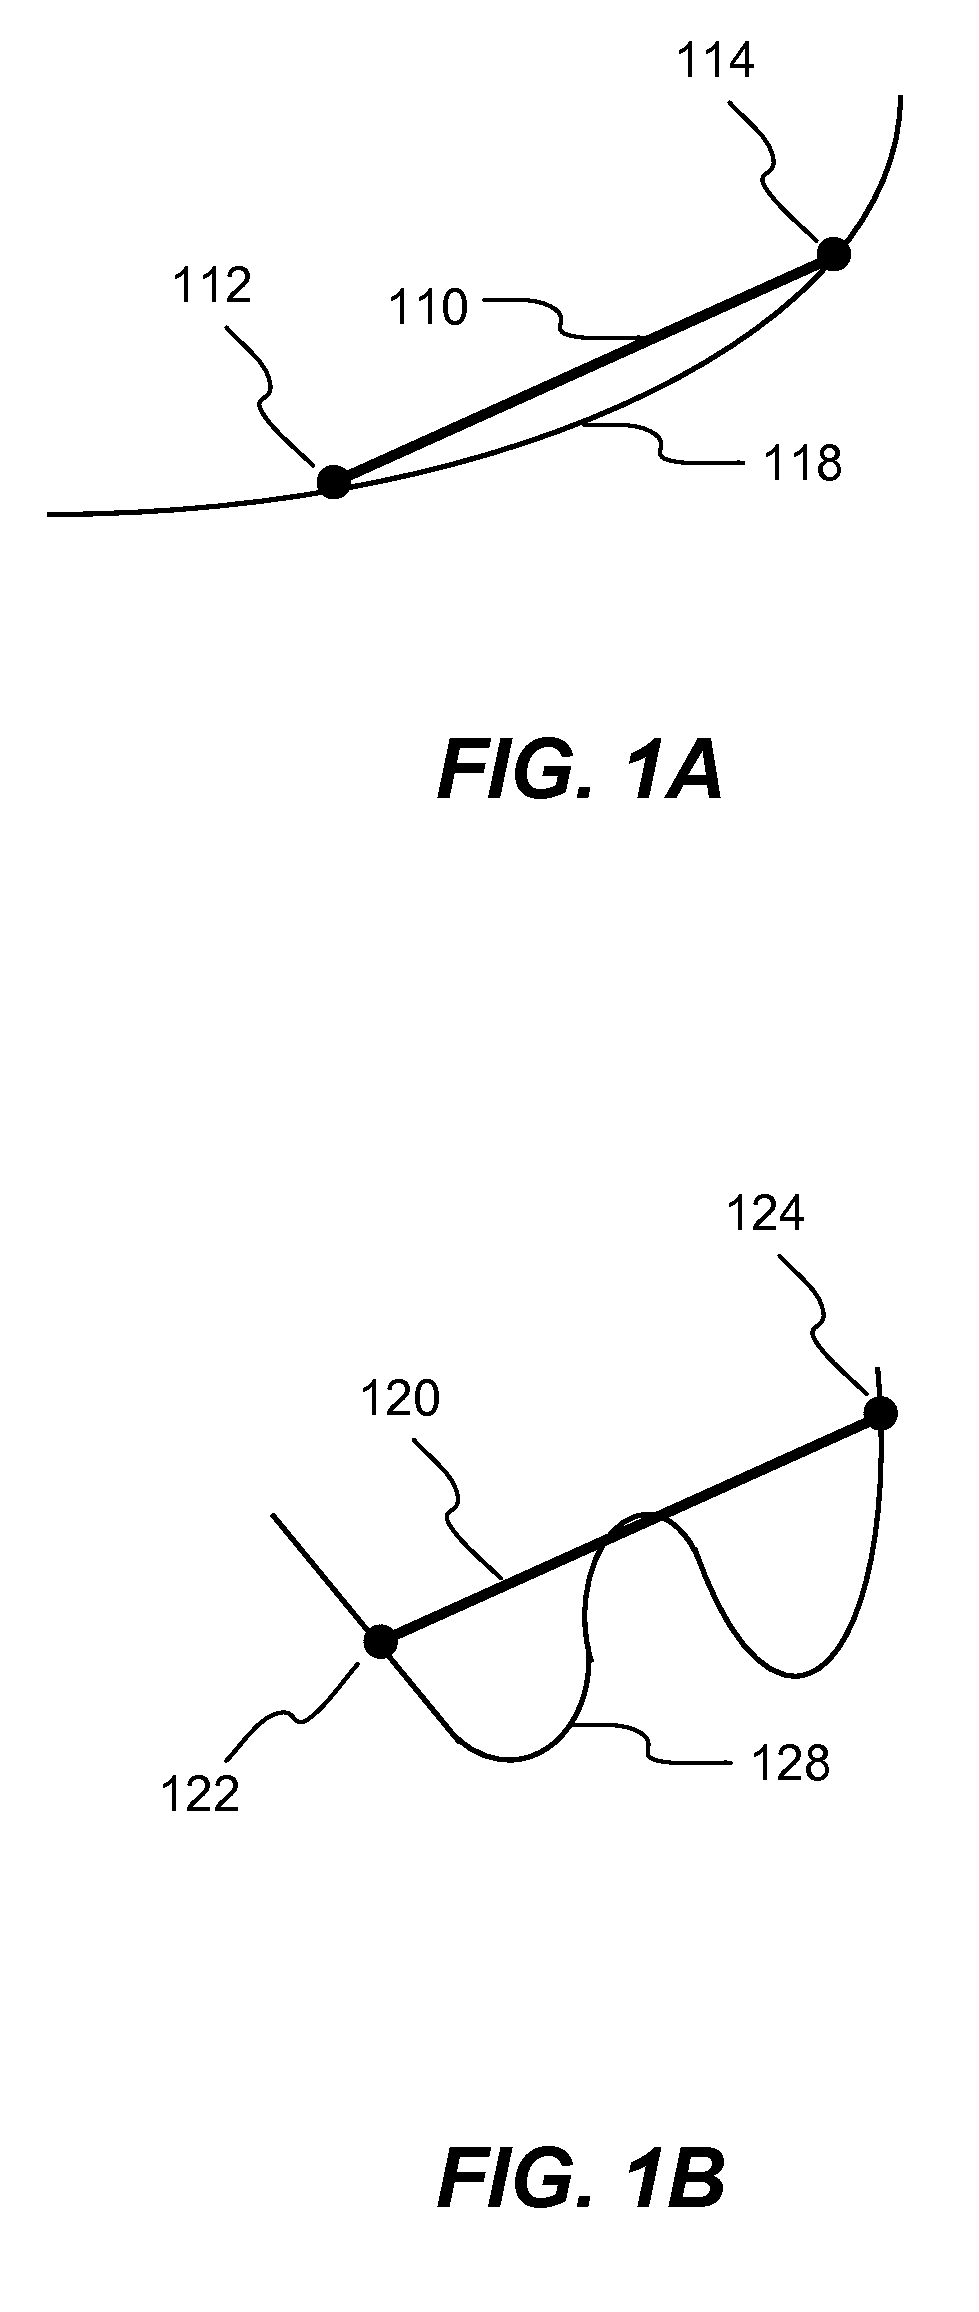 Methods and systems for simulating beam-to-surface contacts in finite element analysis